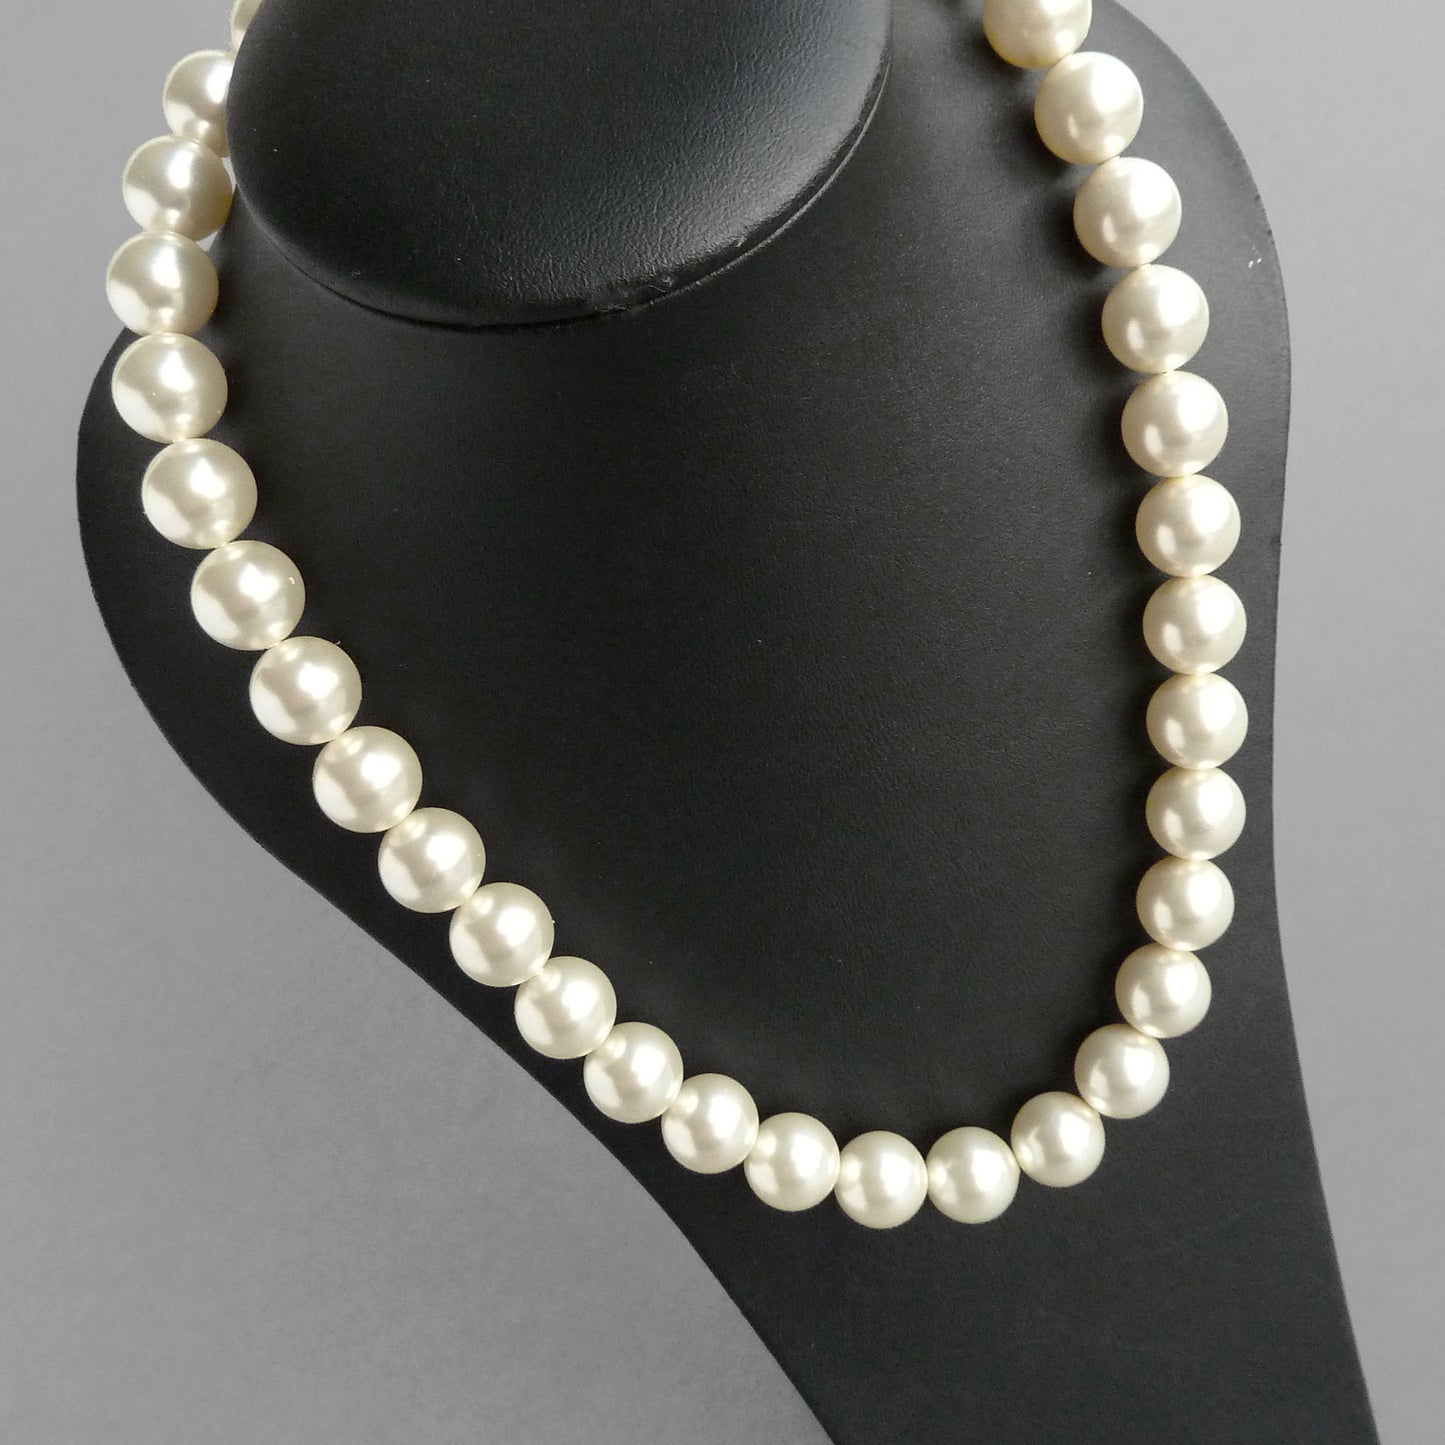 Chunky ivory pearl necklace